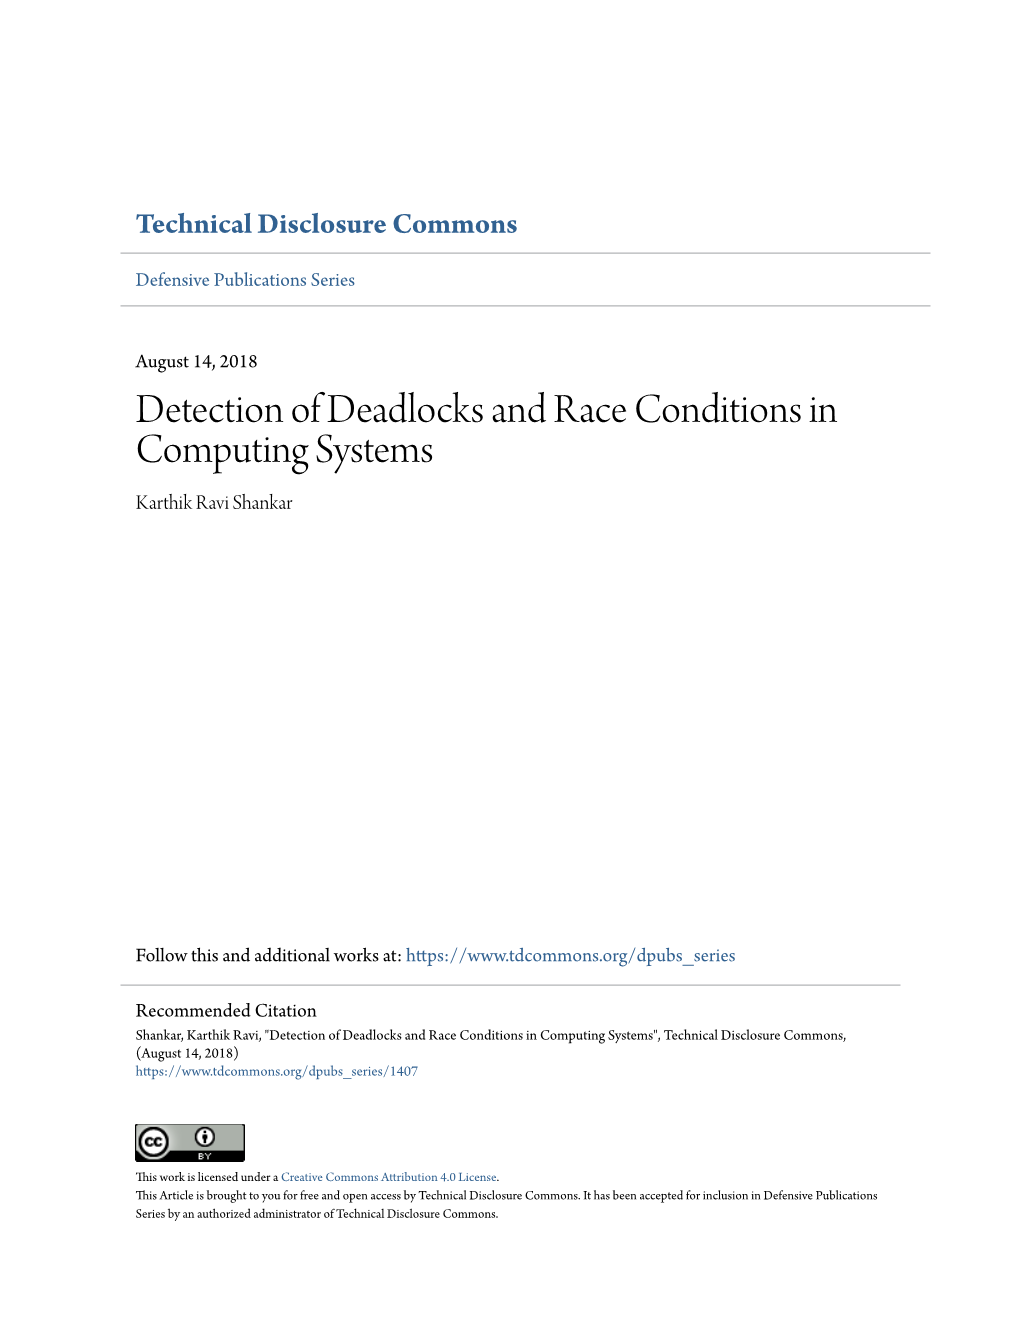 Detection of Deadlocks and Race Conditions in Computing Systems Karthik Ravi Shankar